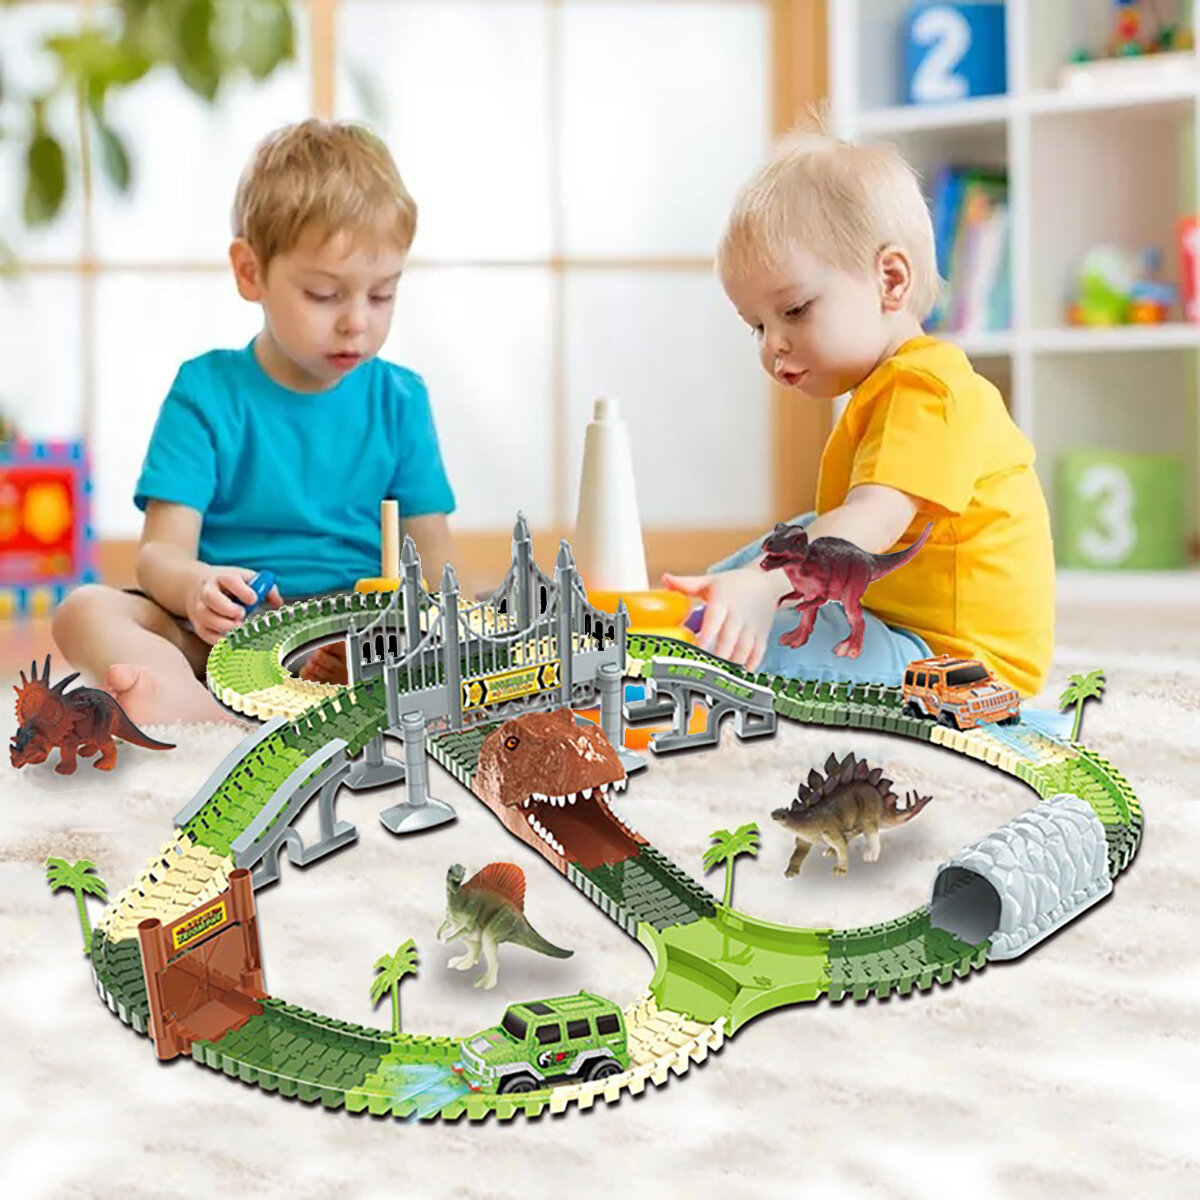 

Dinosaur Railway Toy Car Track Racing Track Toy Set Educational Bend Flexible DIY Assemble Race Track Car Toys for Child